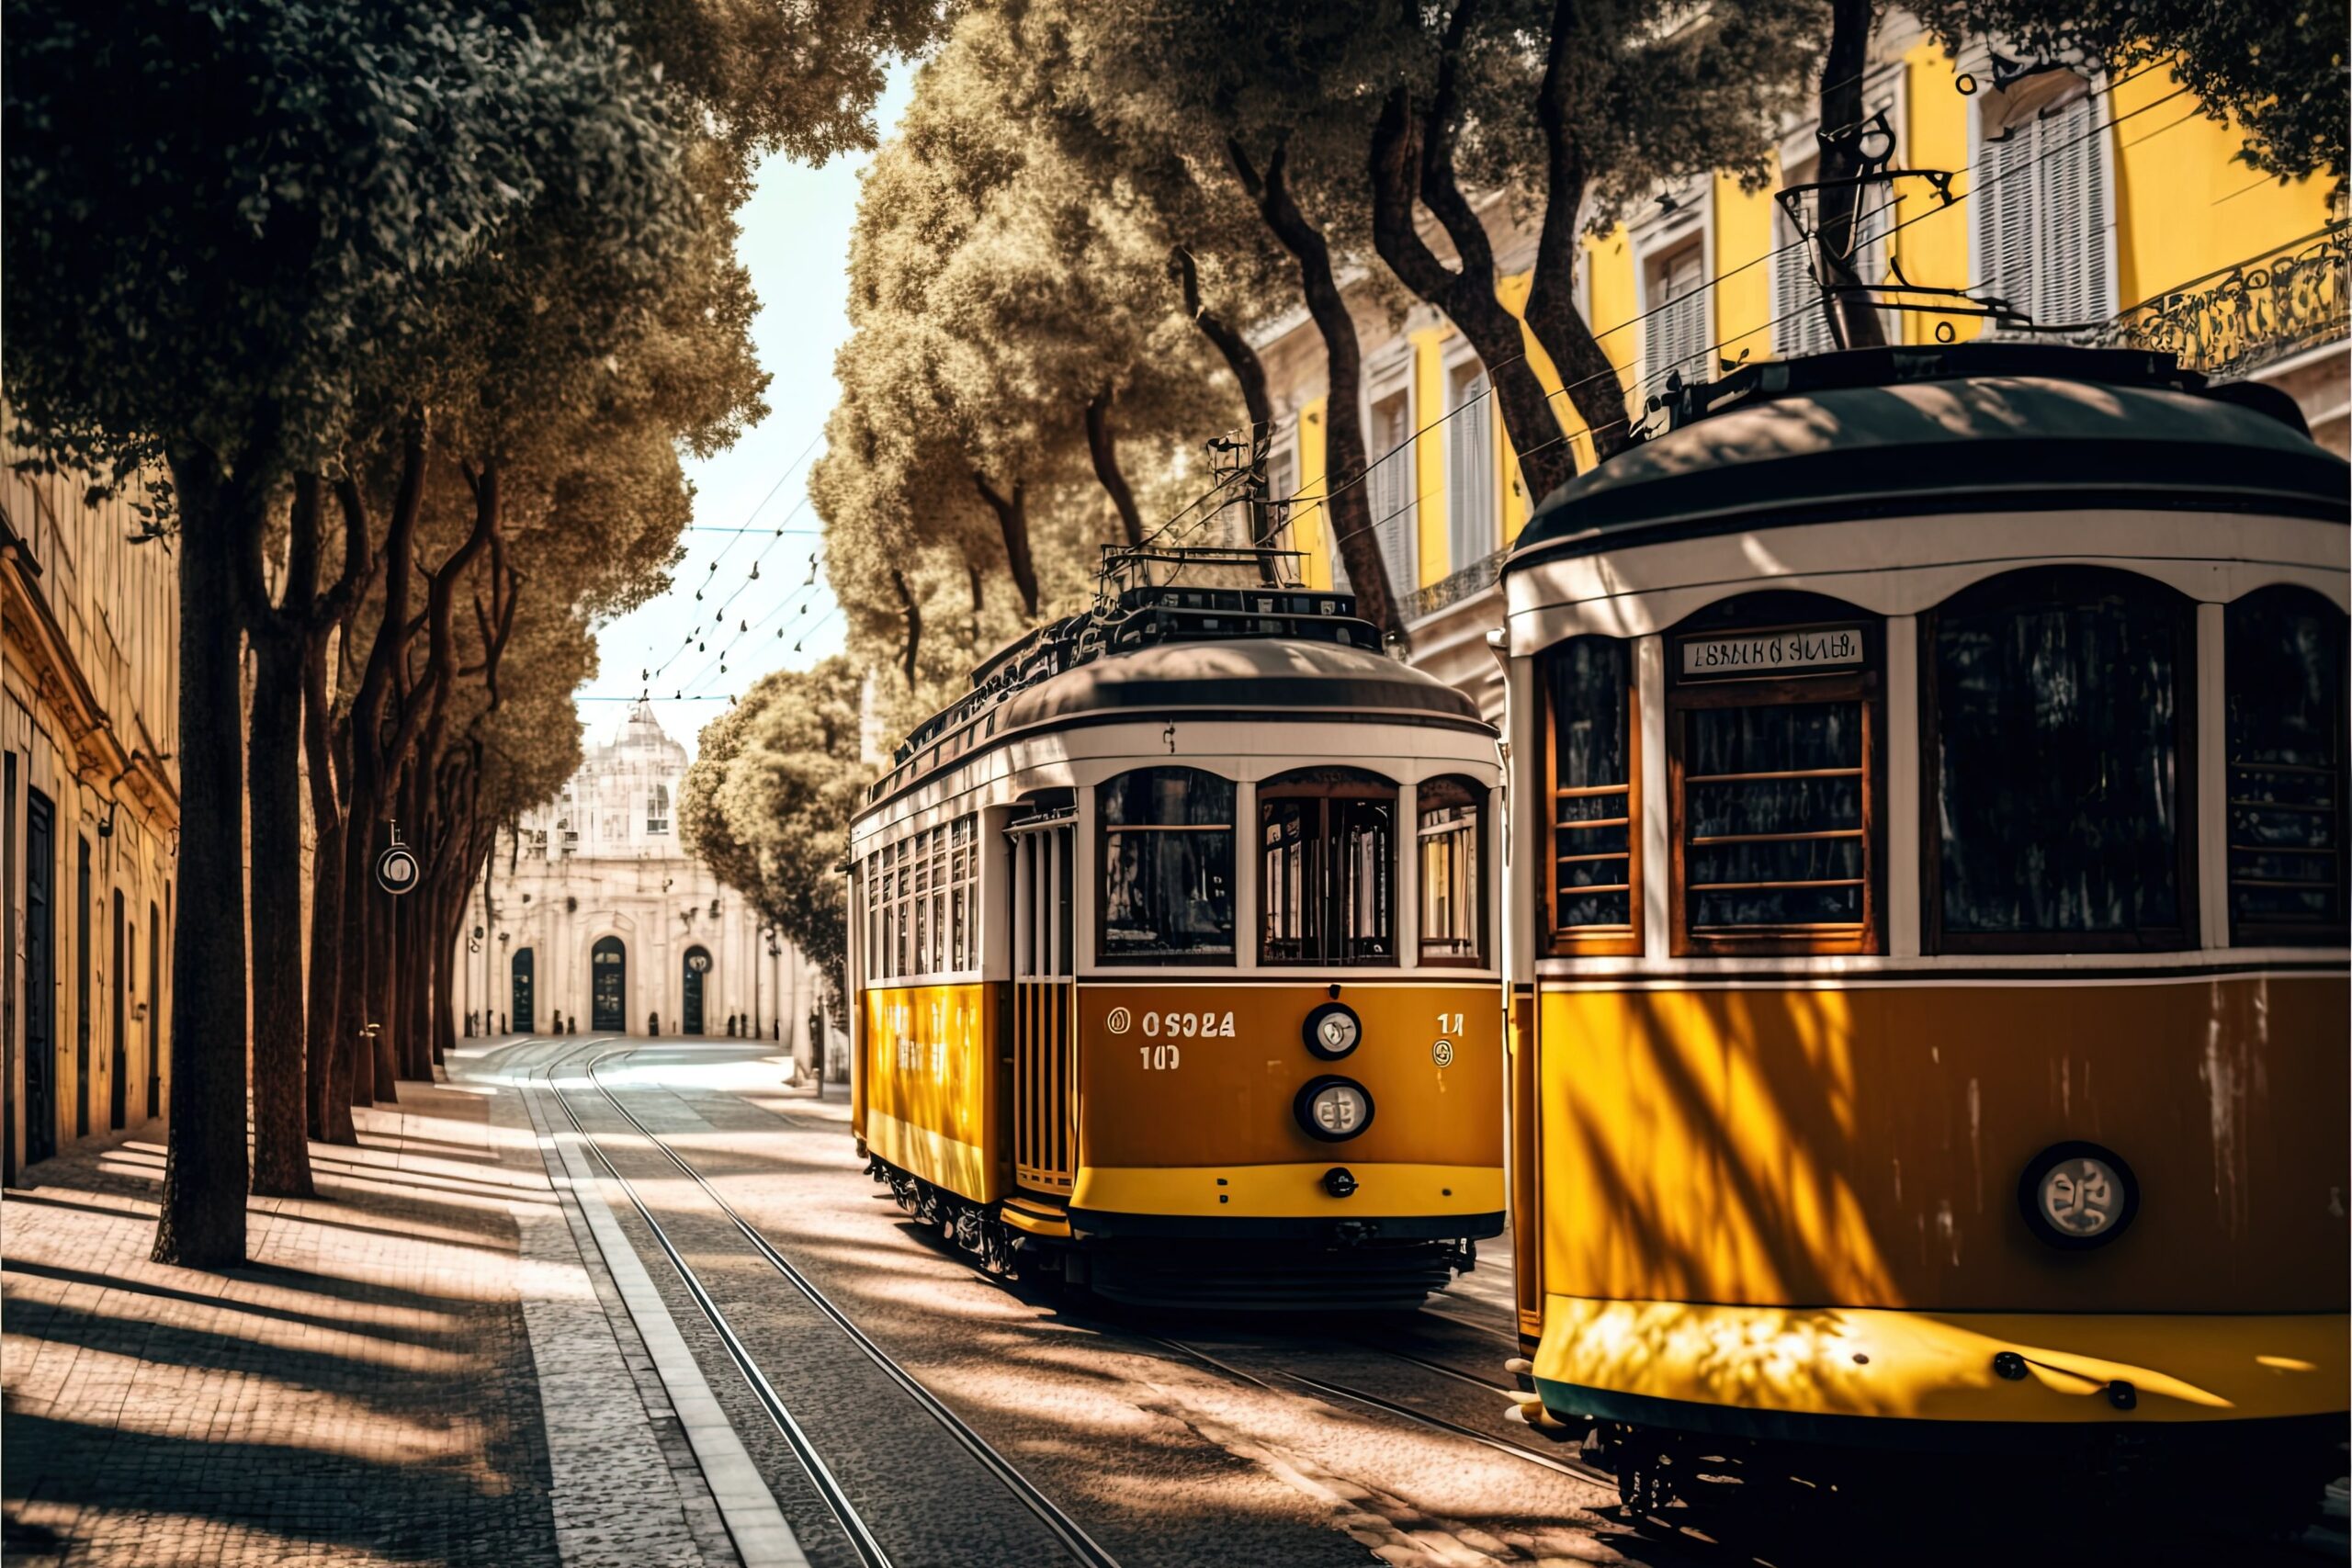 production-services-and-filming-in-portugal-traditional-yellow-trams